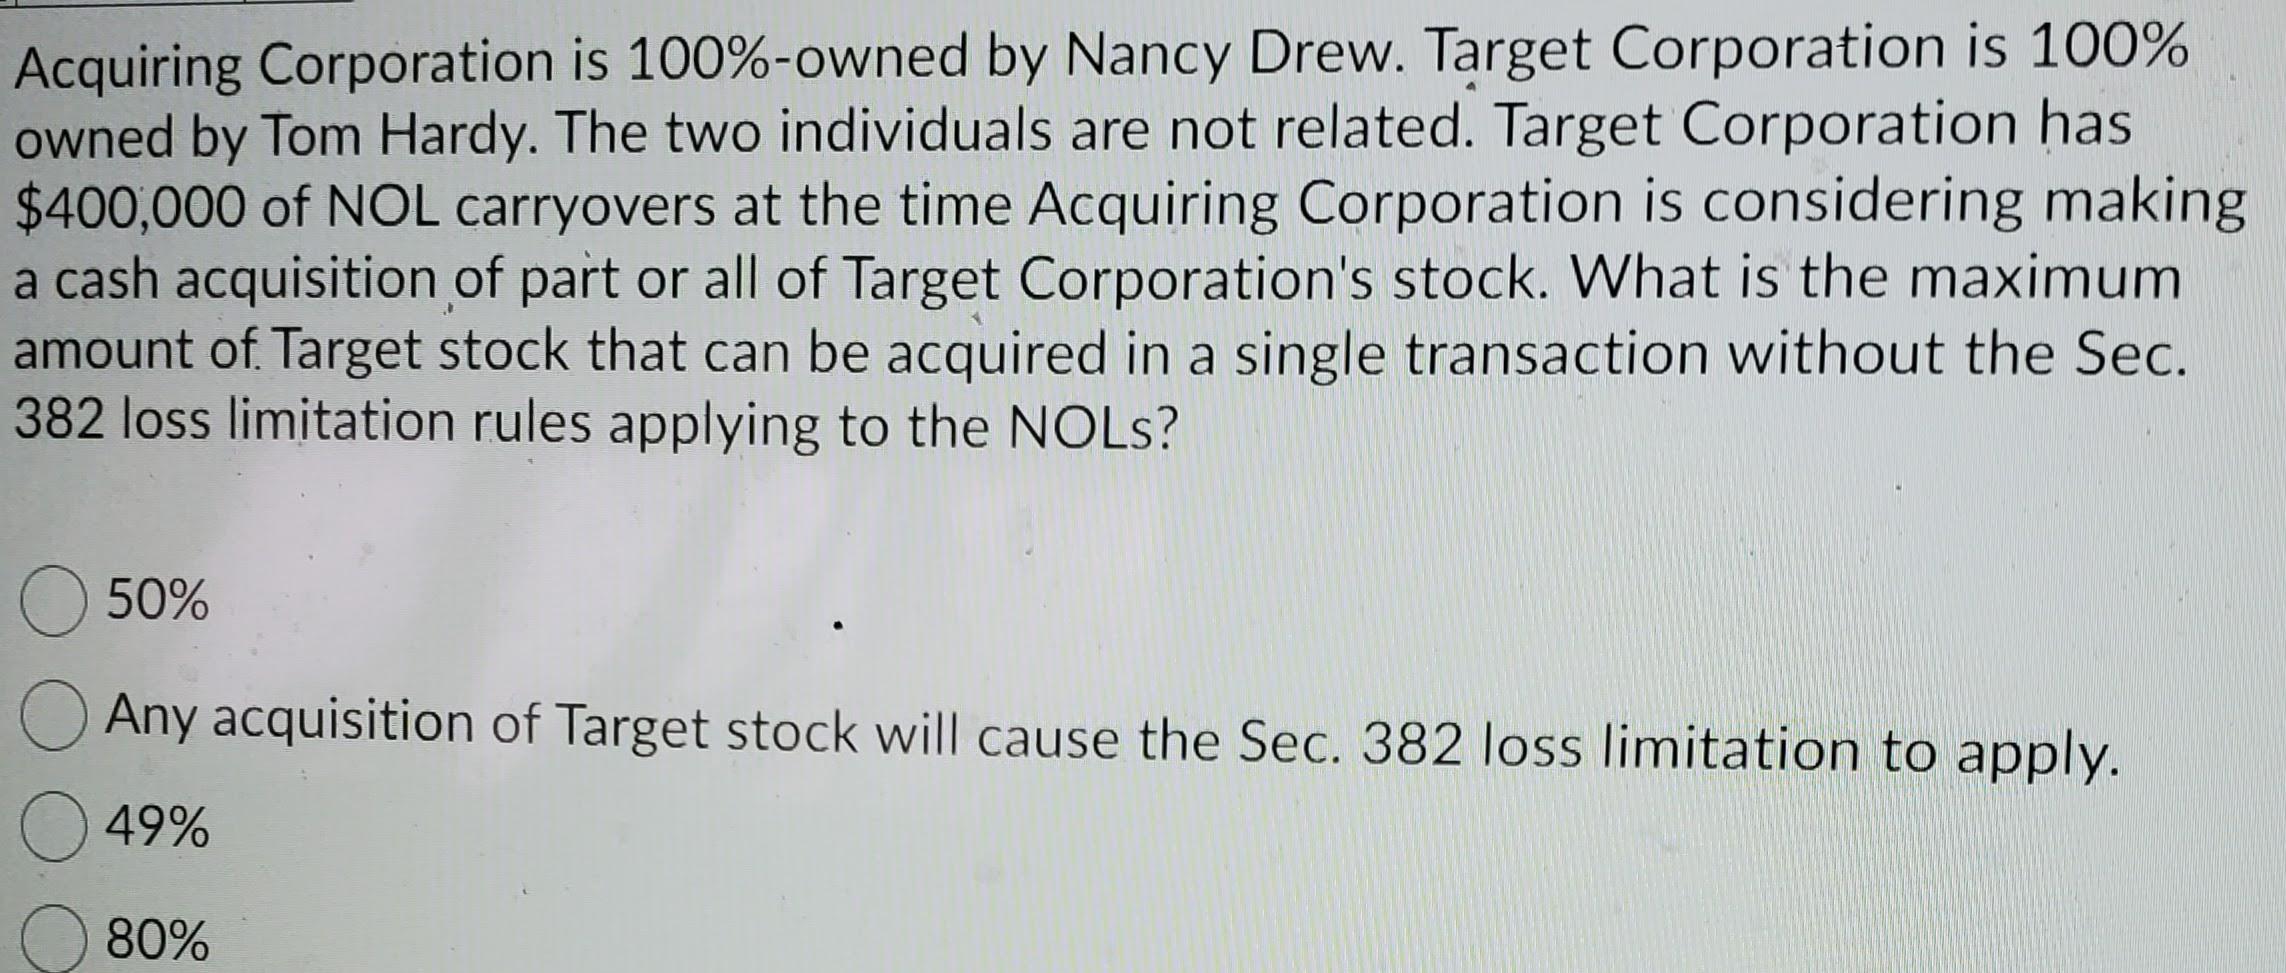 Acquiring Corporation is 100%-owned by Nancy Drew. Target Corporation is 100%owned by Tom Hardy. The two individuals are not